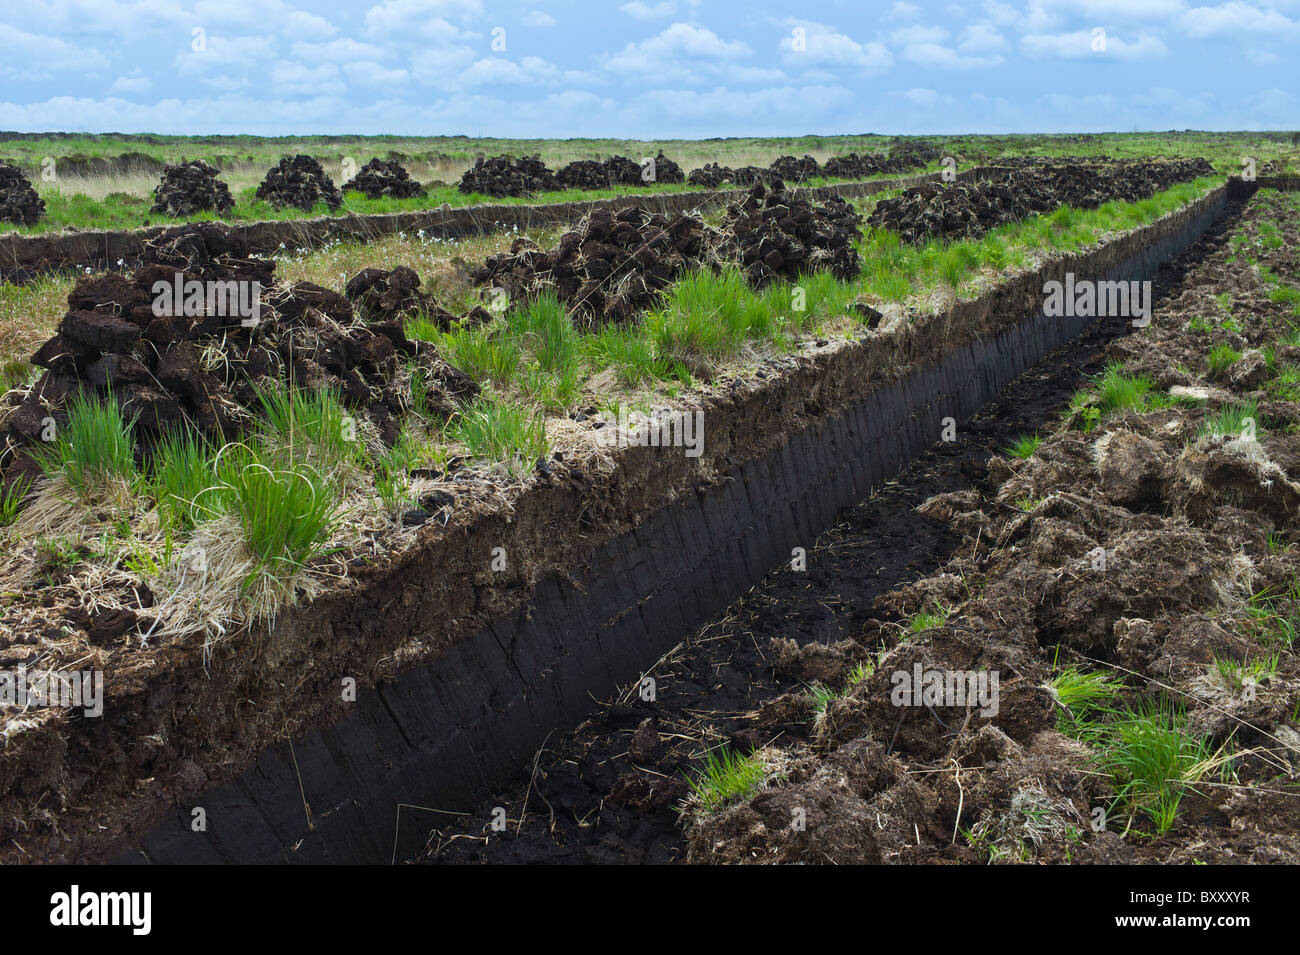 Turf bog shows cutting and stacks of peat (footings) at Mountrivers peat bog, County Clare, West of Ireland Stock Photo